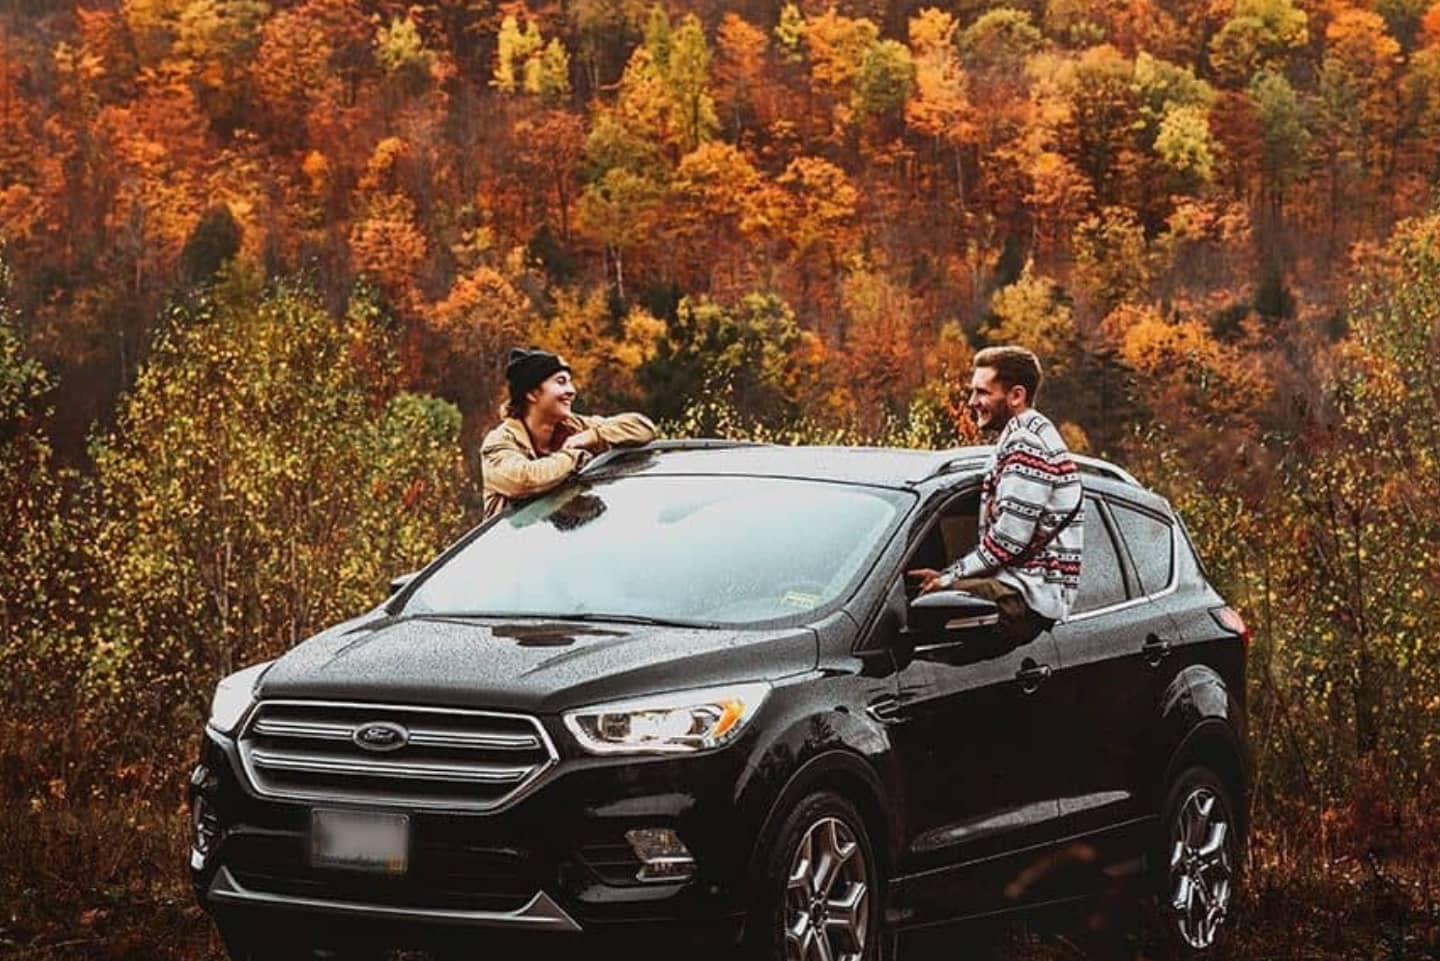 A used Ford Escape Titanium near a field of fall colors with two people sitting on the edge of the windows.